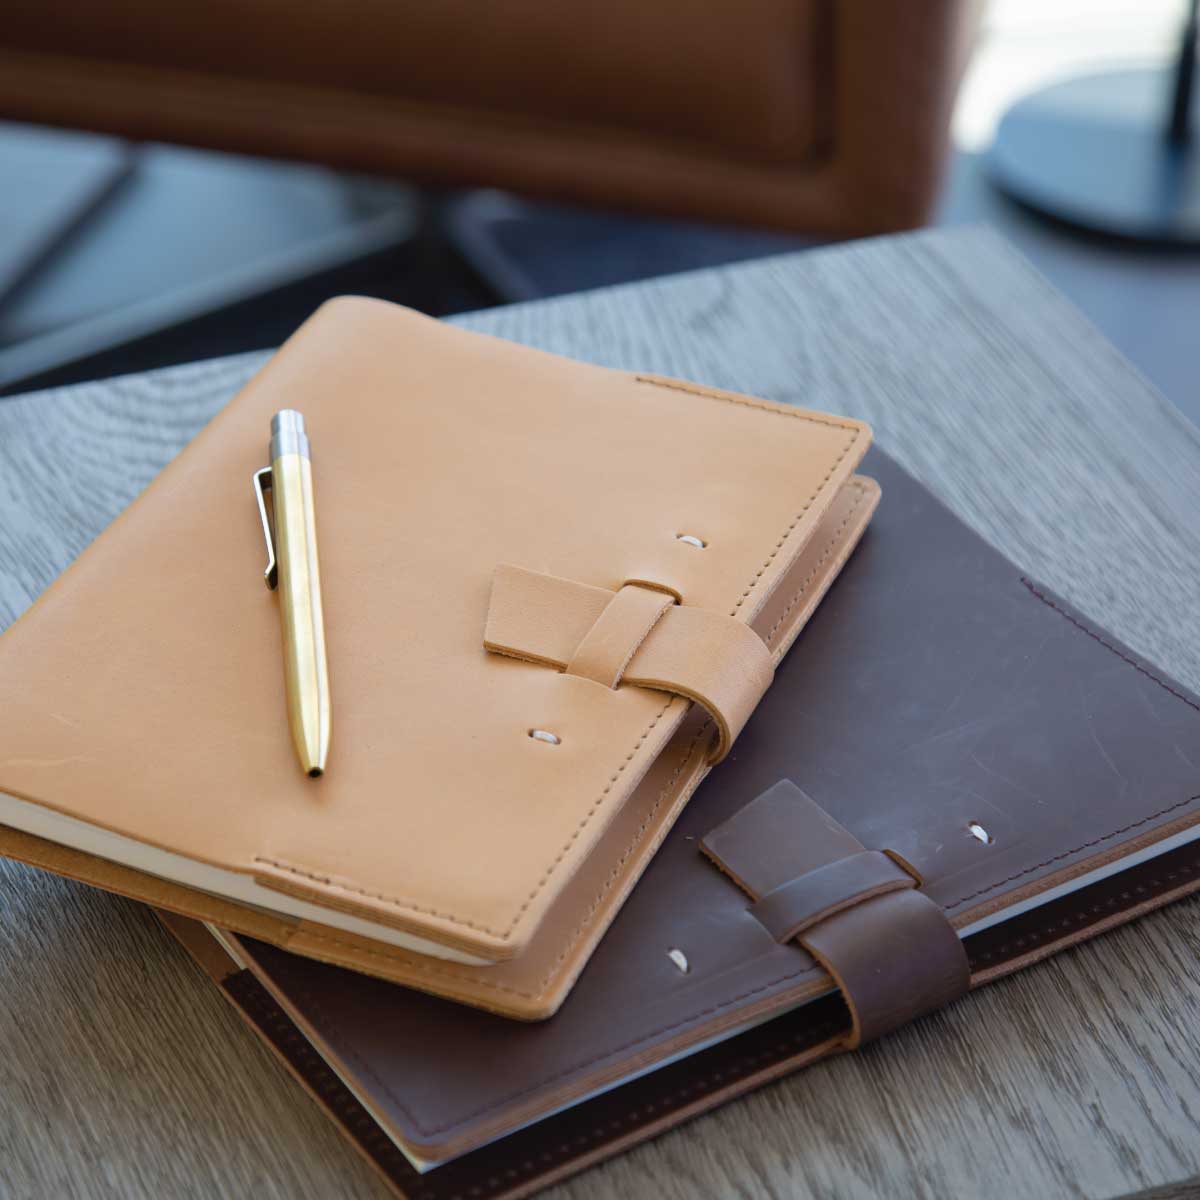 Refillable Leather Agenda Cover